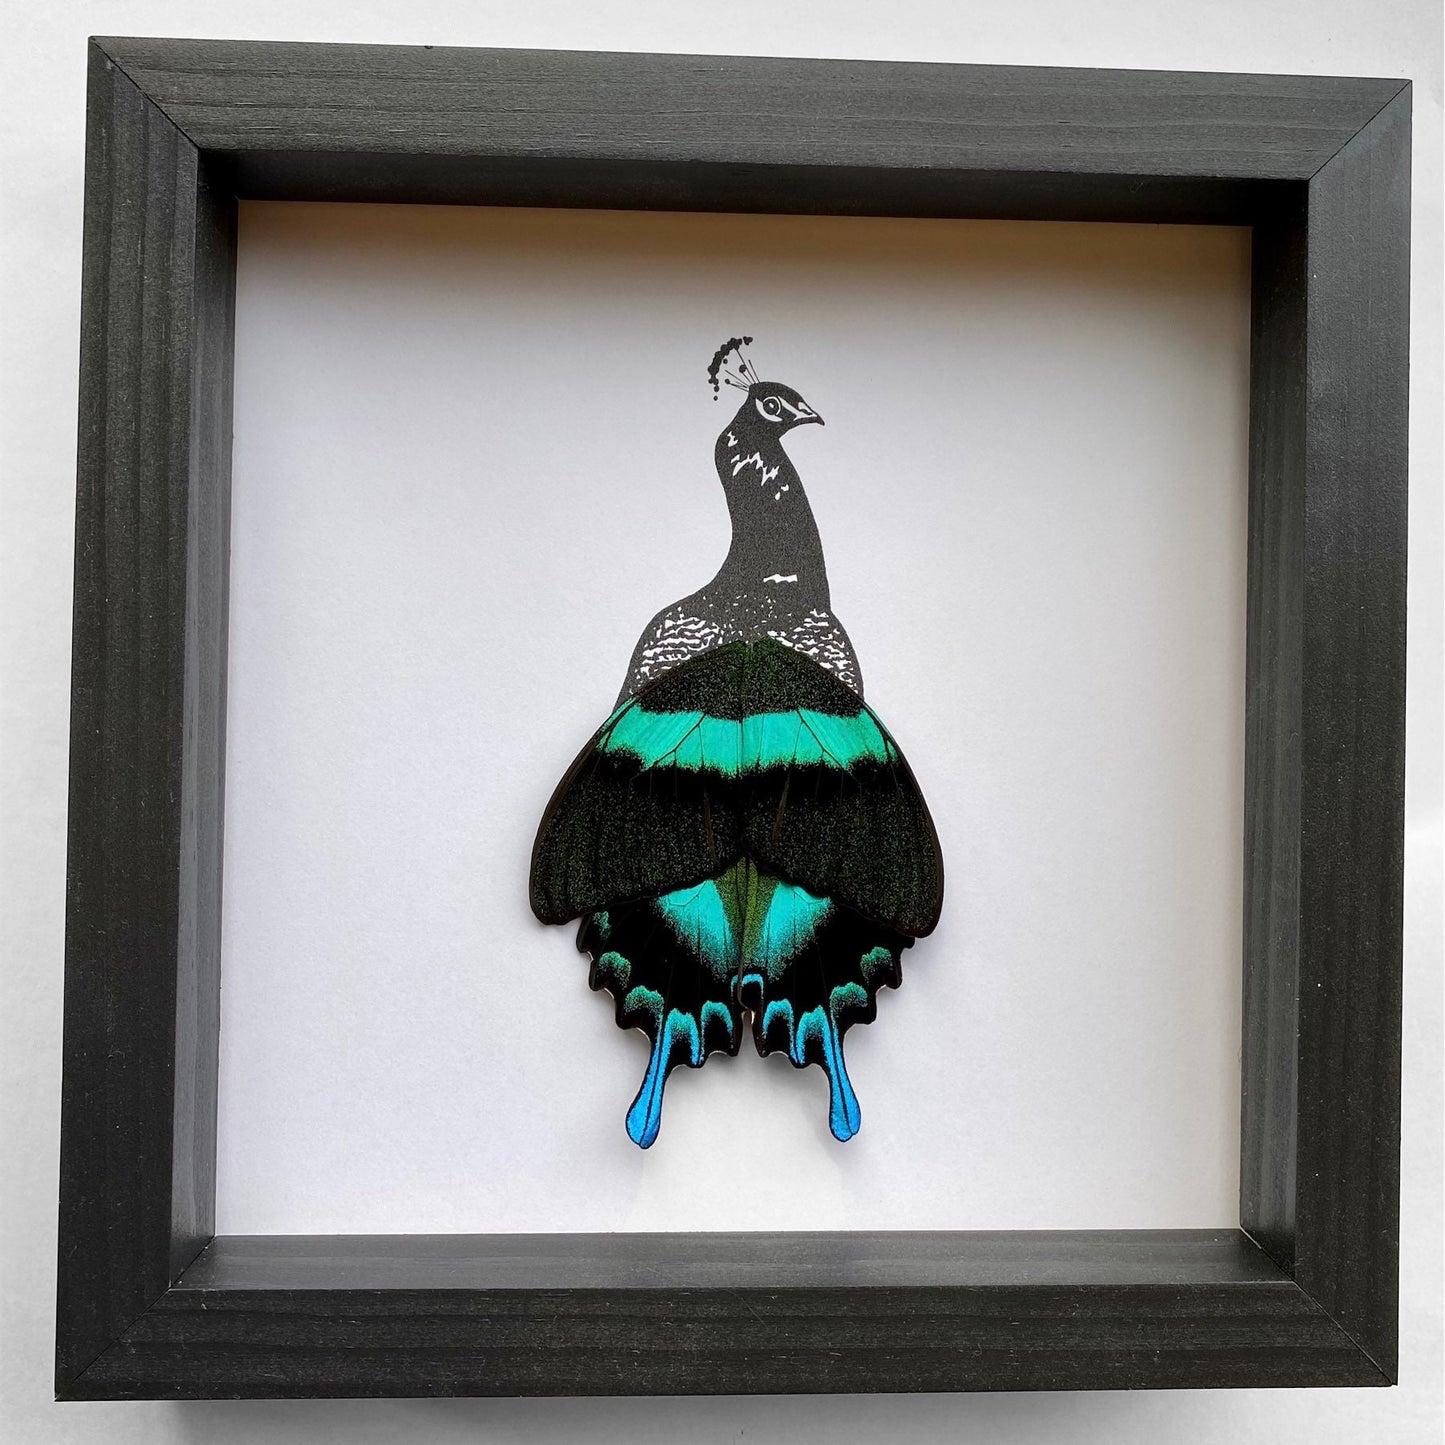 Peacock Real Butterfly Wing Art Ethically Sourced Made in MN USA - Holly Ulm - Isms Butterfly Conservation Art